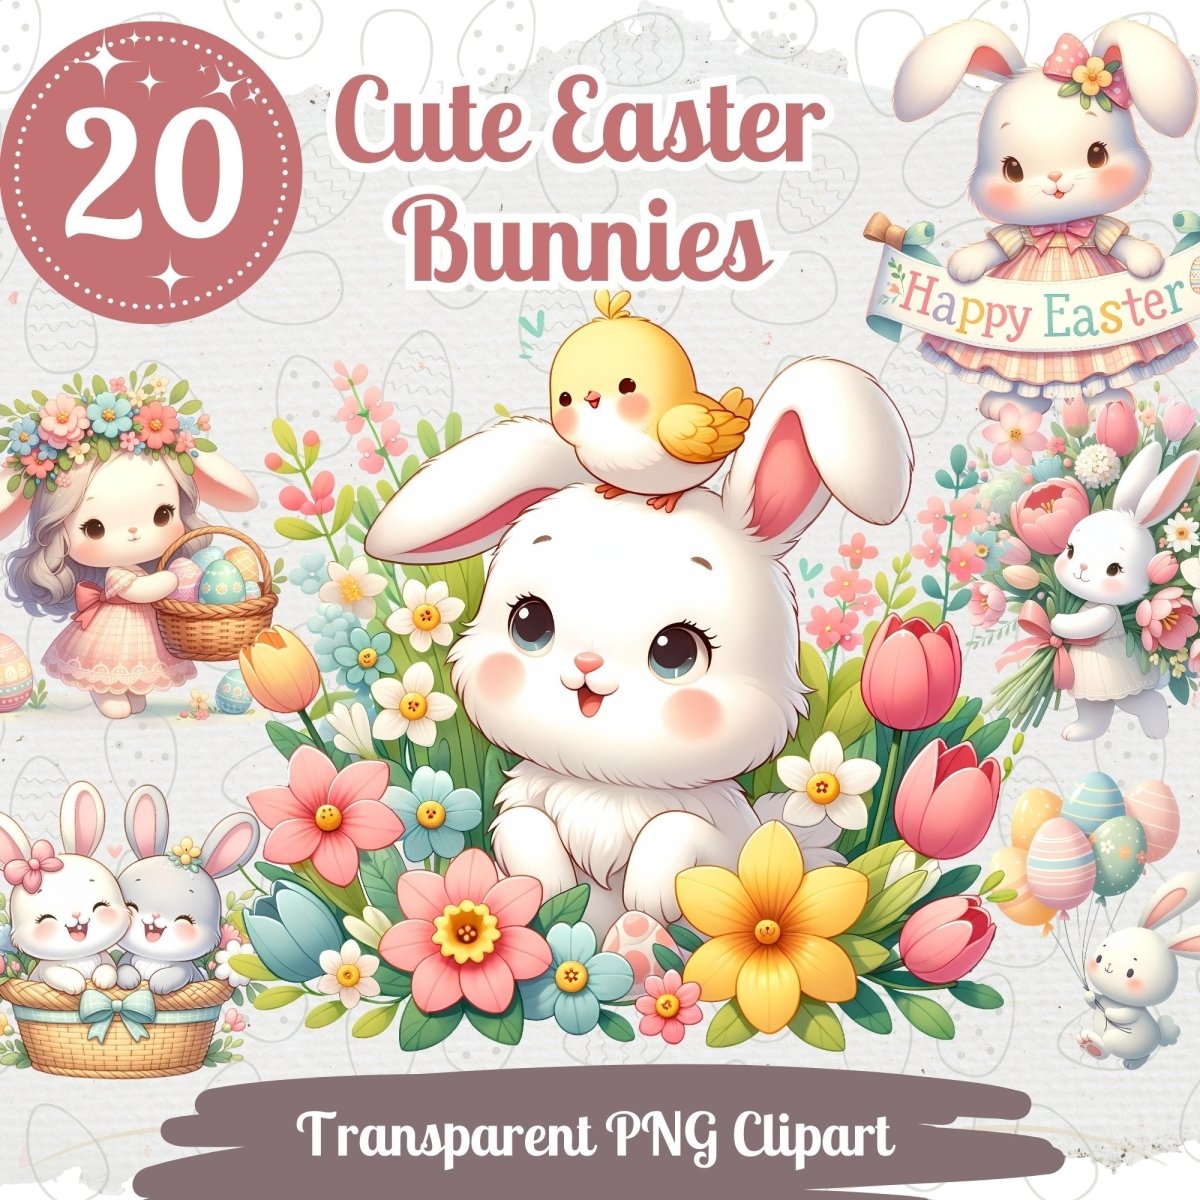 Cute Easter Bunny Cliparts 20 PNG Bundle Lovely Pastel Easter Bunnies Card Crafting Junk Journal Kit Happy Easter Spring Graphic - Everything Pixel